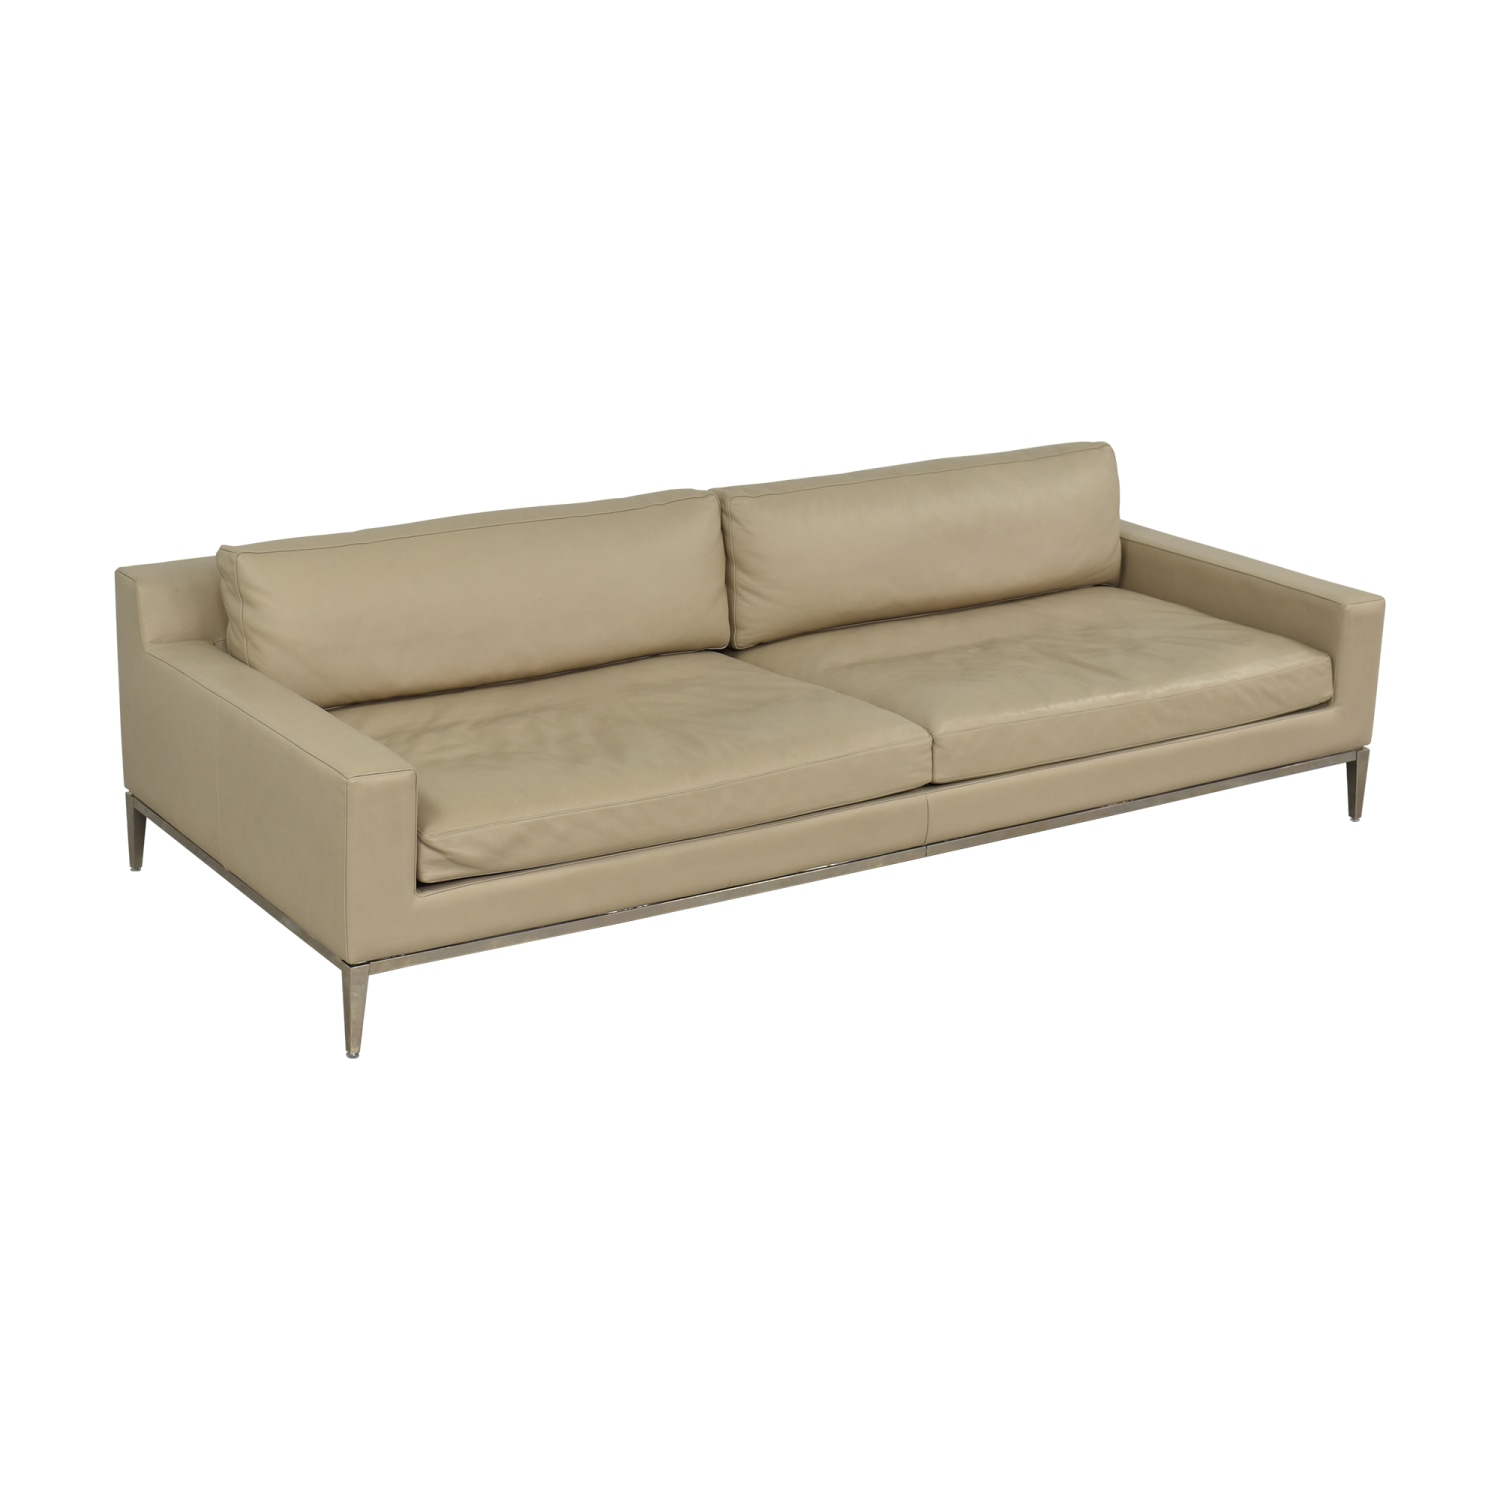 Restoration Hardware Restoration Hardware Italia Track Arm Sofa  for sale